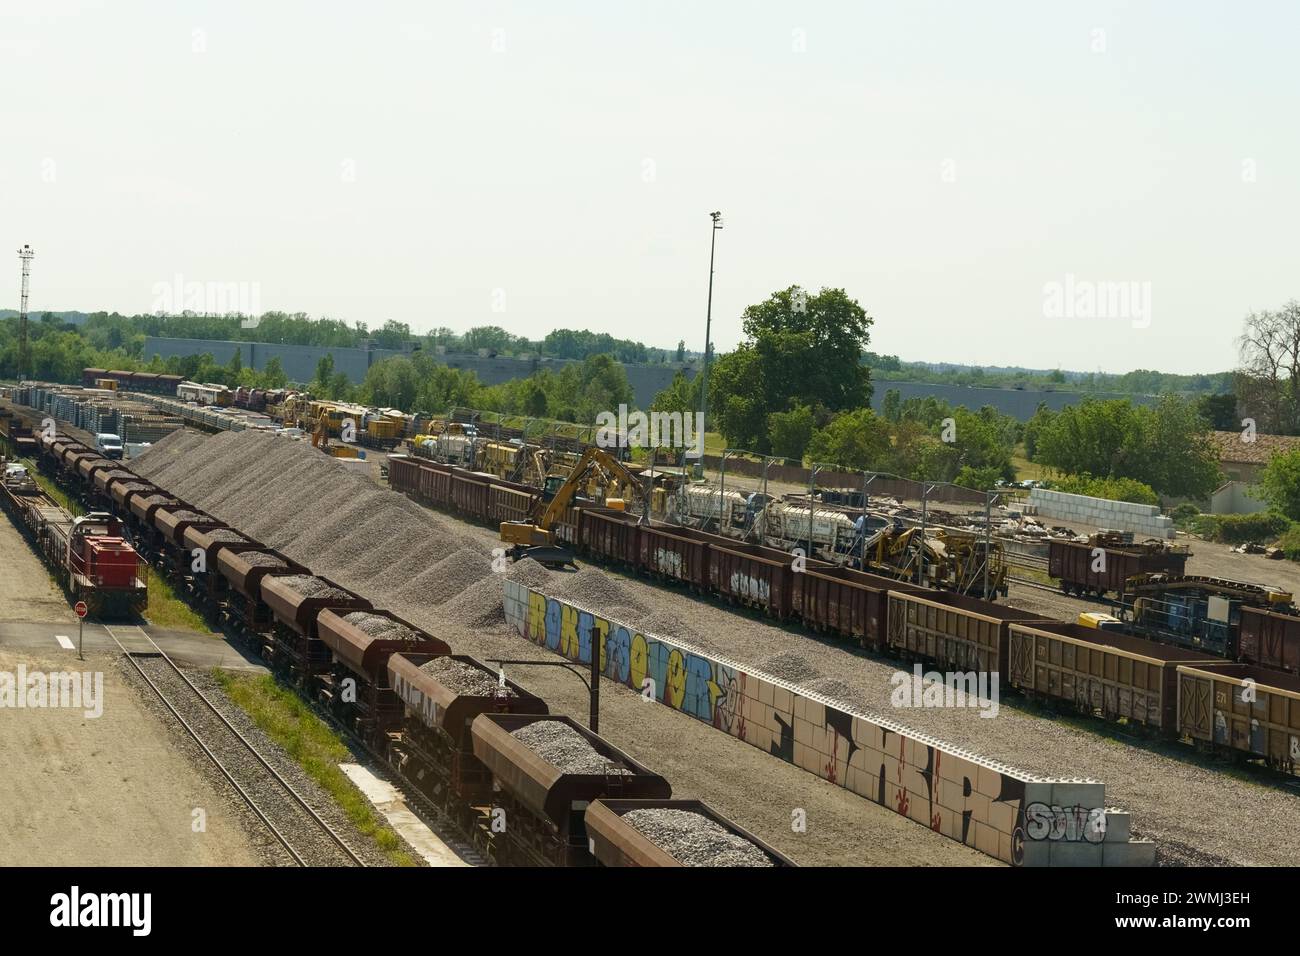 Lyon, France - May 16, 2023: Multiple rows of freight trains are loaded with various goods at a sprawling train yard. The day is clear and sunny, show Stock Photo